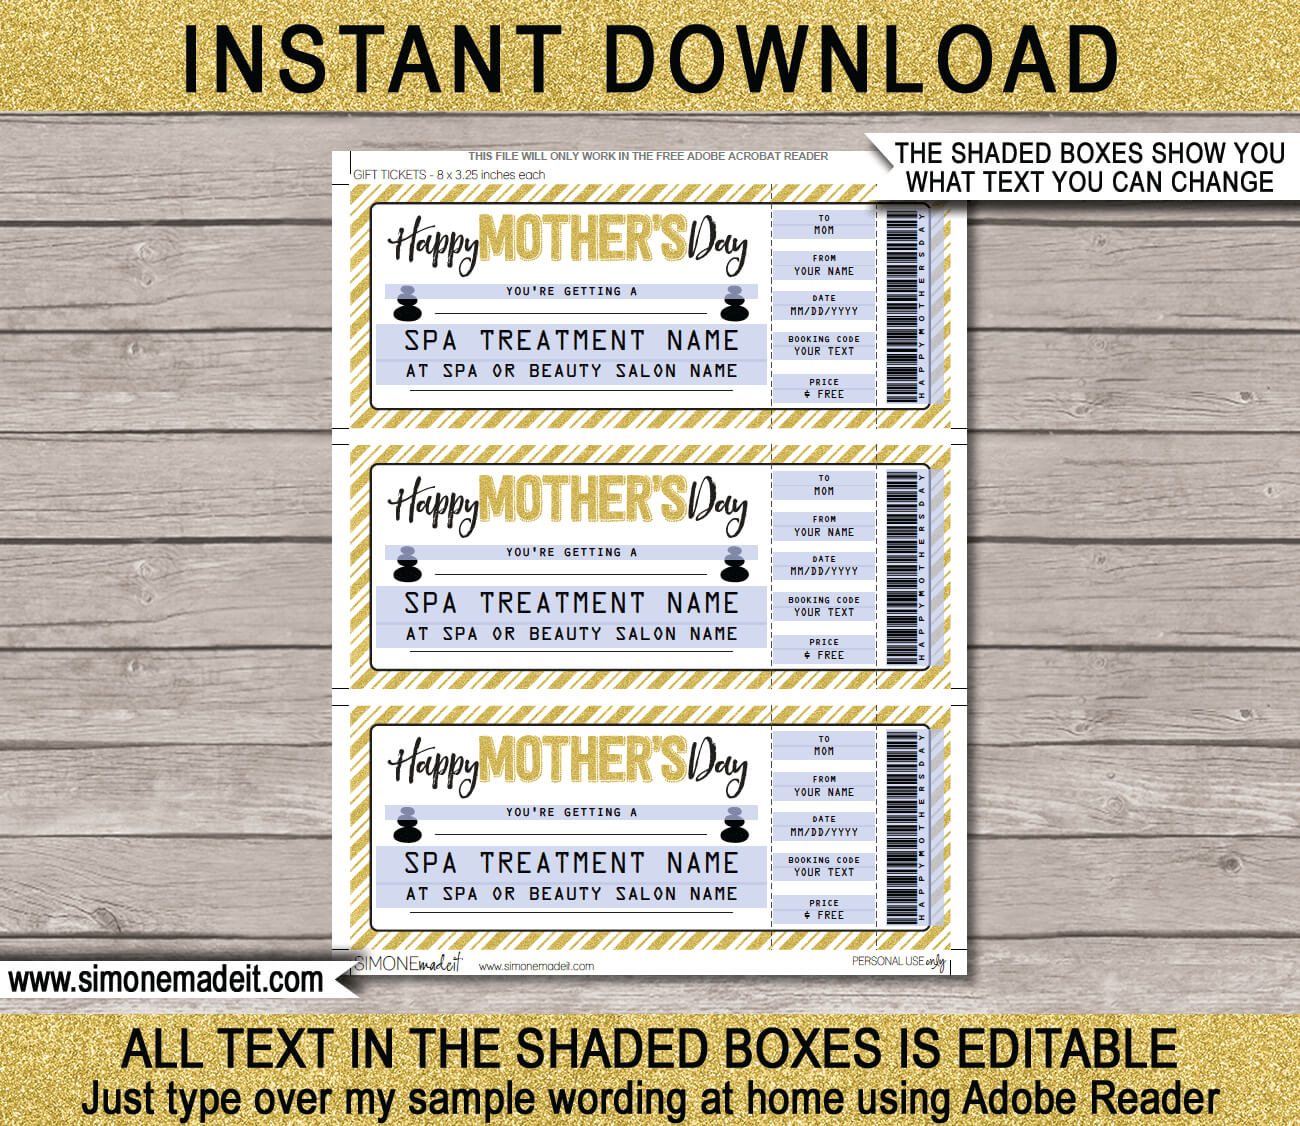 Mother's Day Spa Gift Voucher Regarding Spa Day Gift Certificate Template